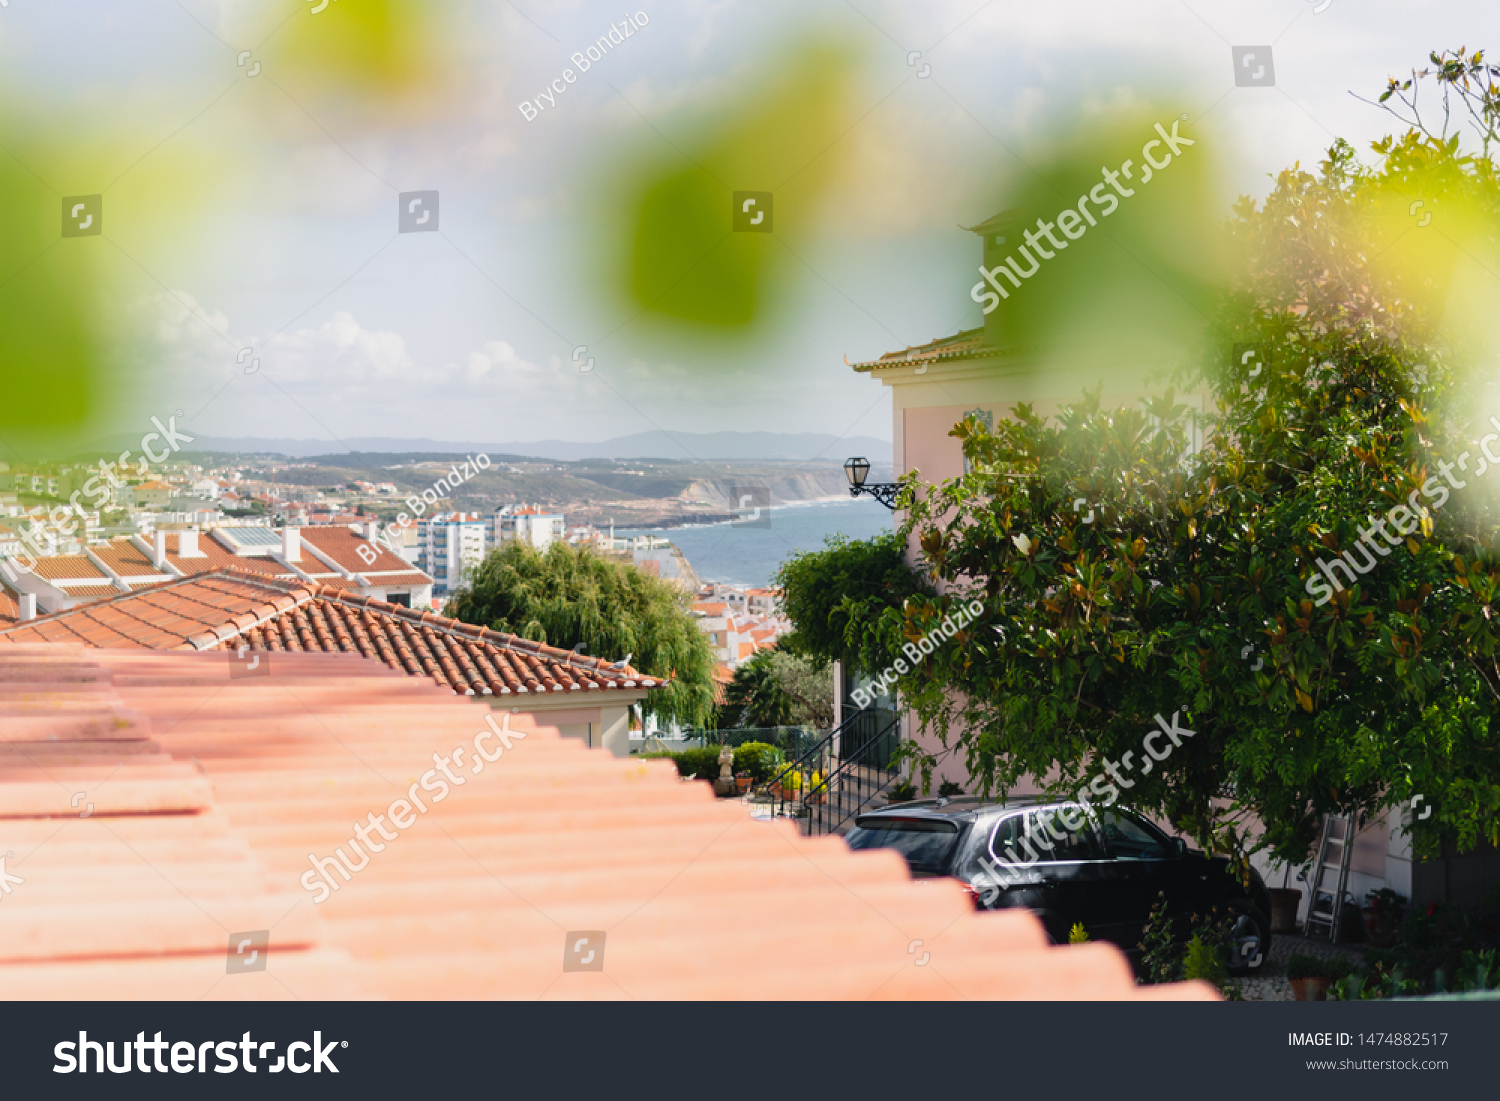 Overview Little City Ericeira Portugal Traditional Stock Image